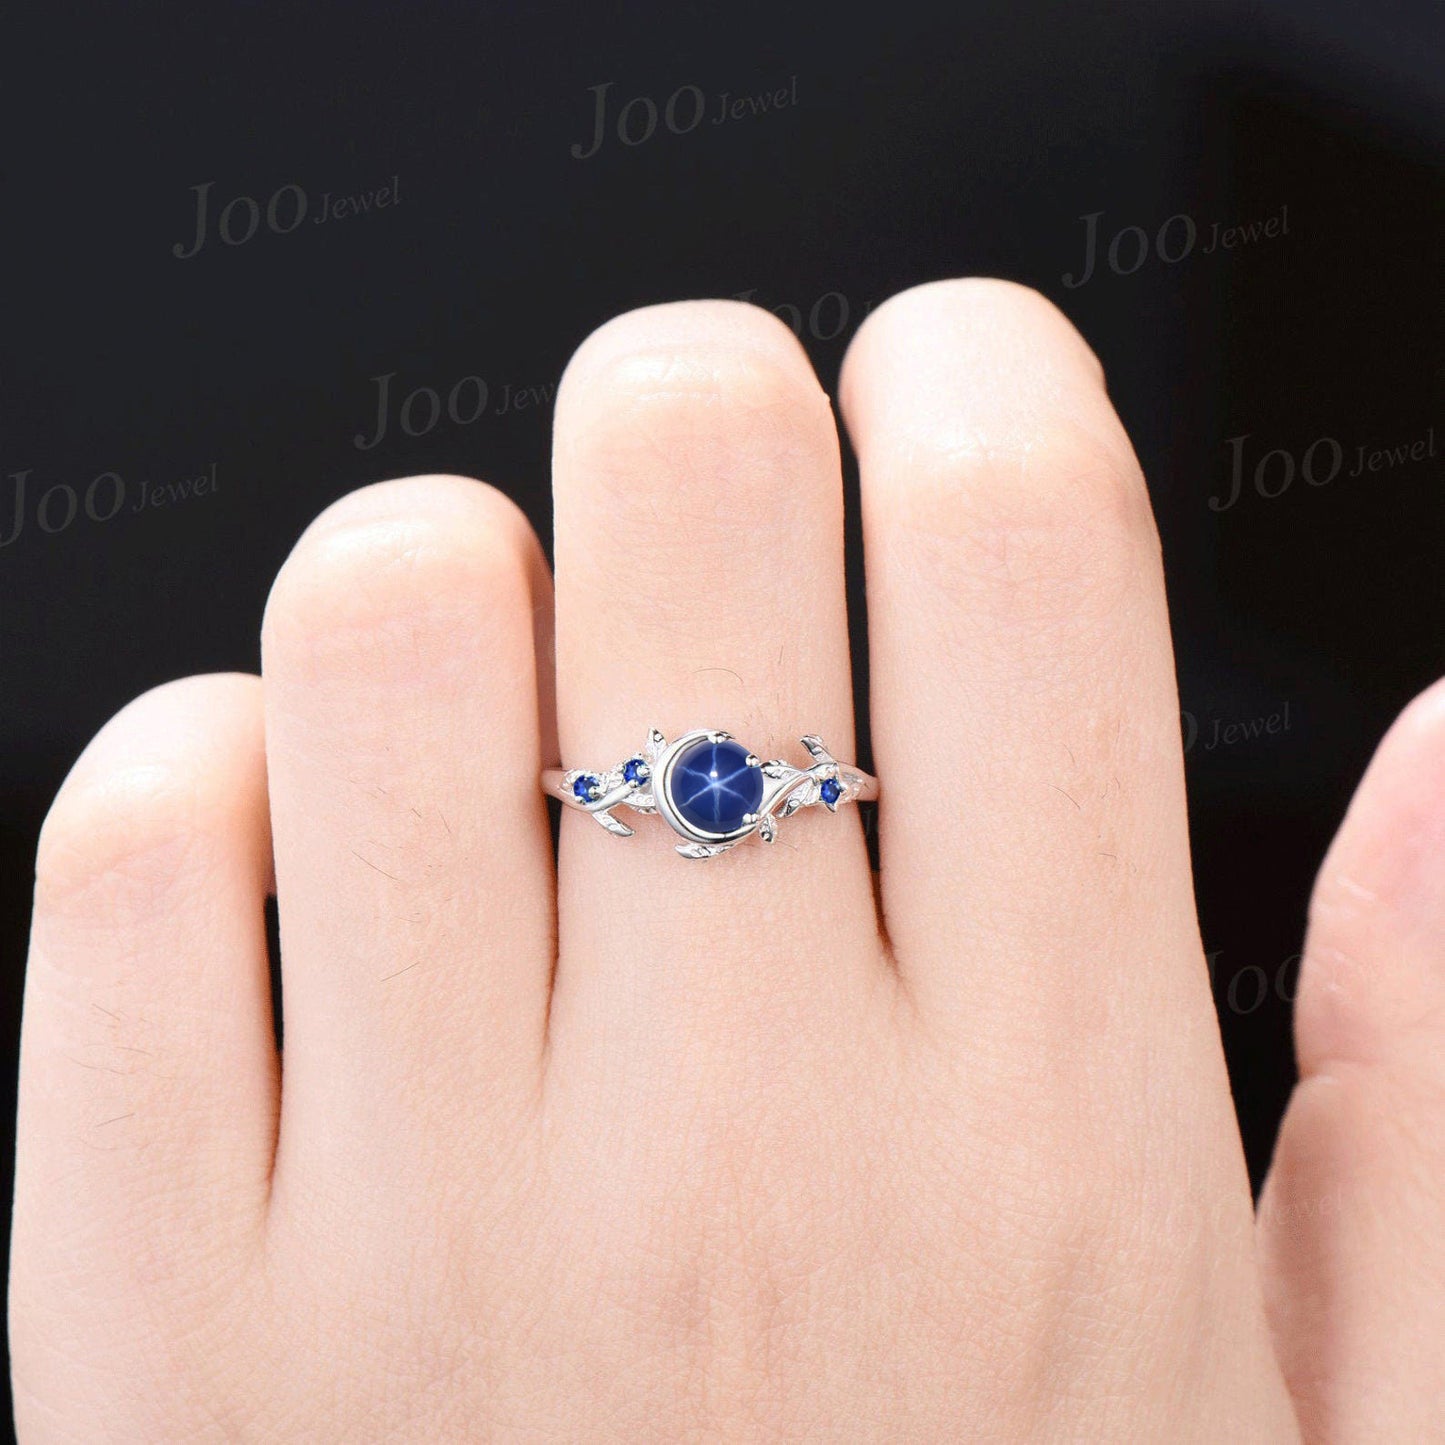 5mm Nature Inspired Round Cut Star Sapphire Moon Engagement Ring Blue Sapphire Wedding Ring Cluster Star Blue Ring Unique Personalized Gifts